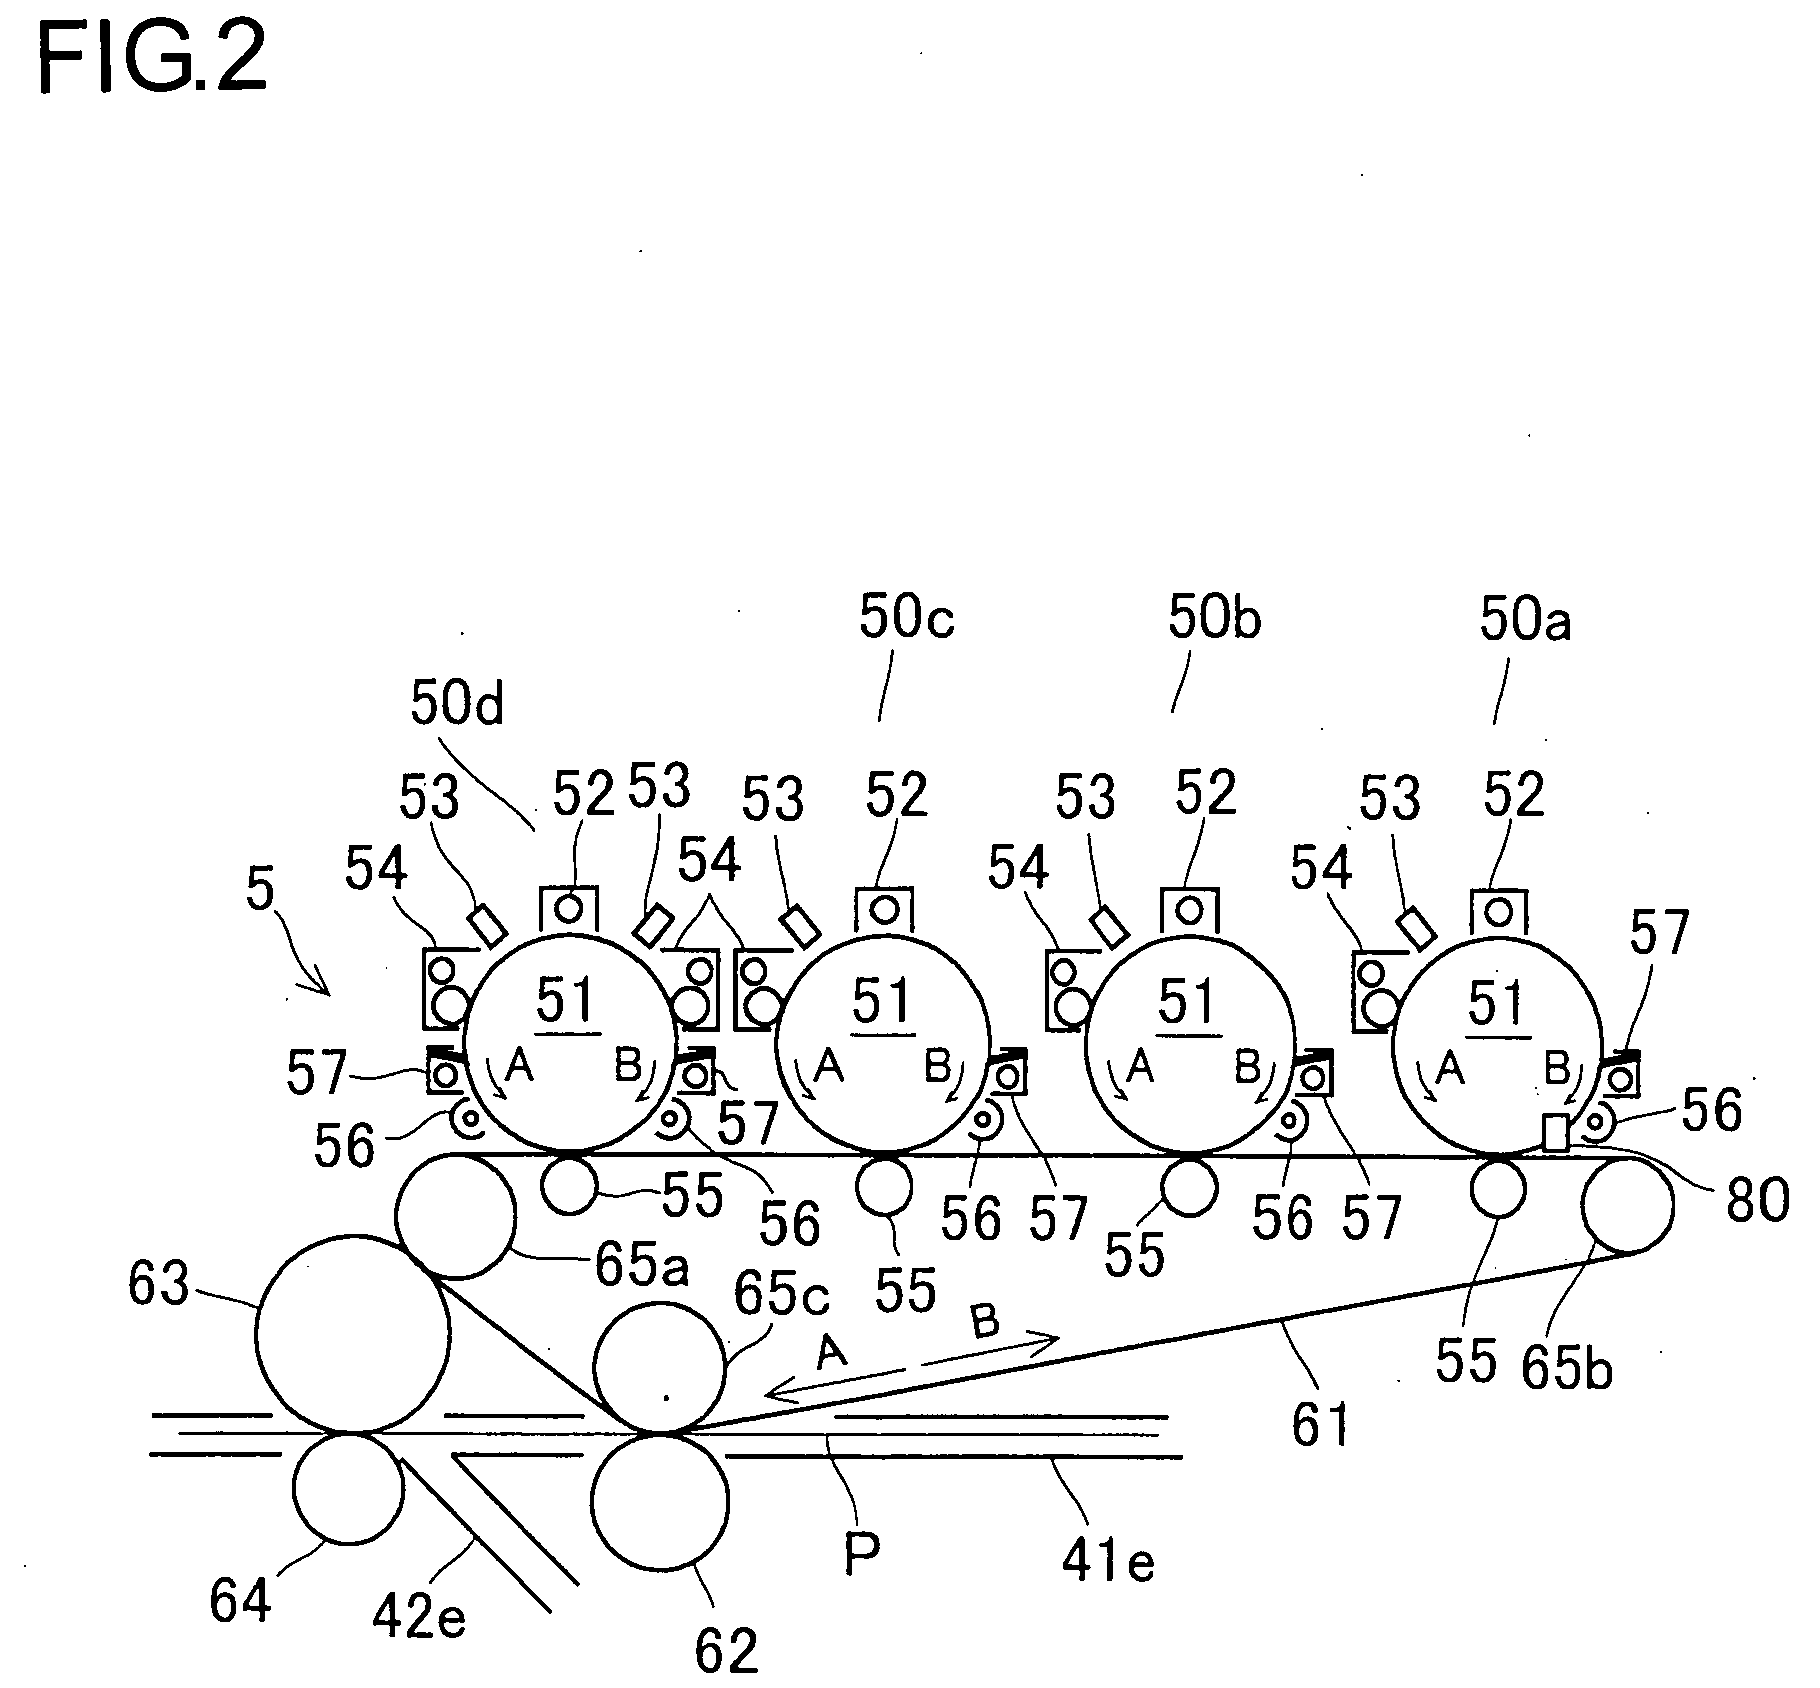 Image forming apparatus and control device